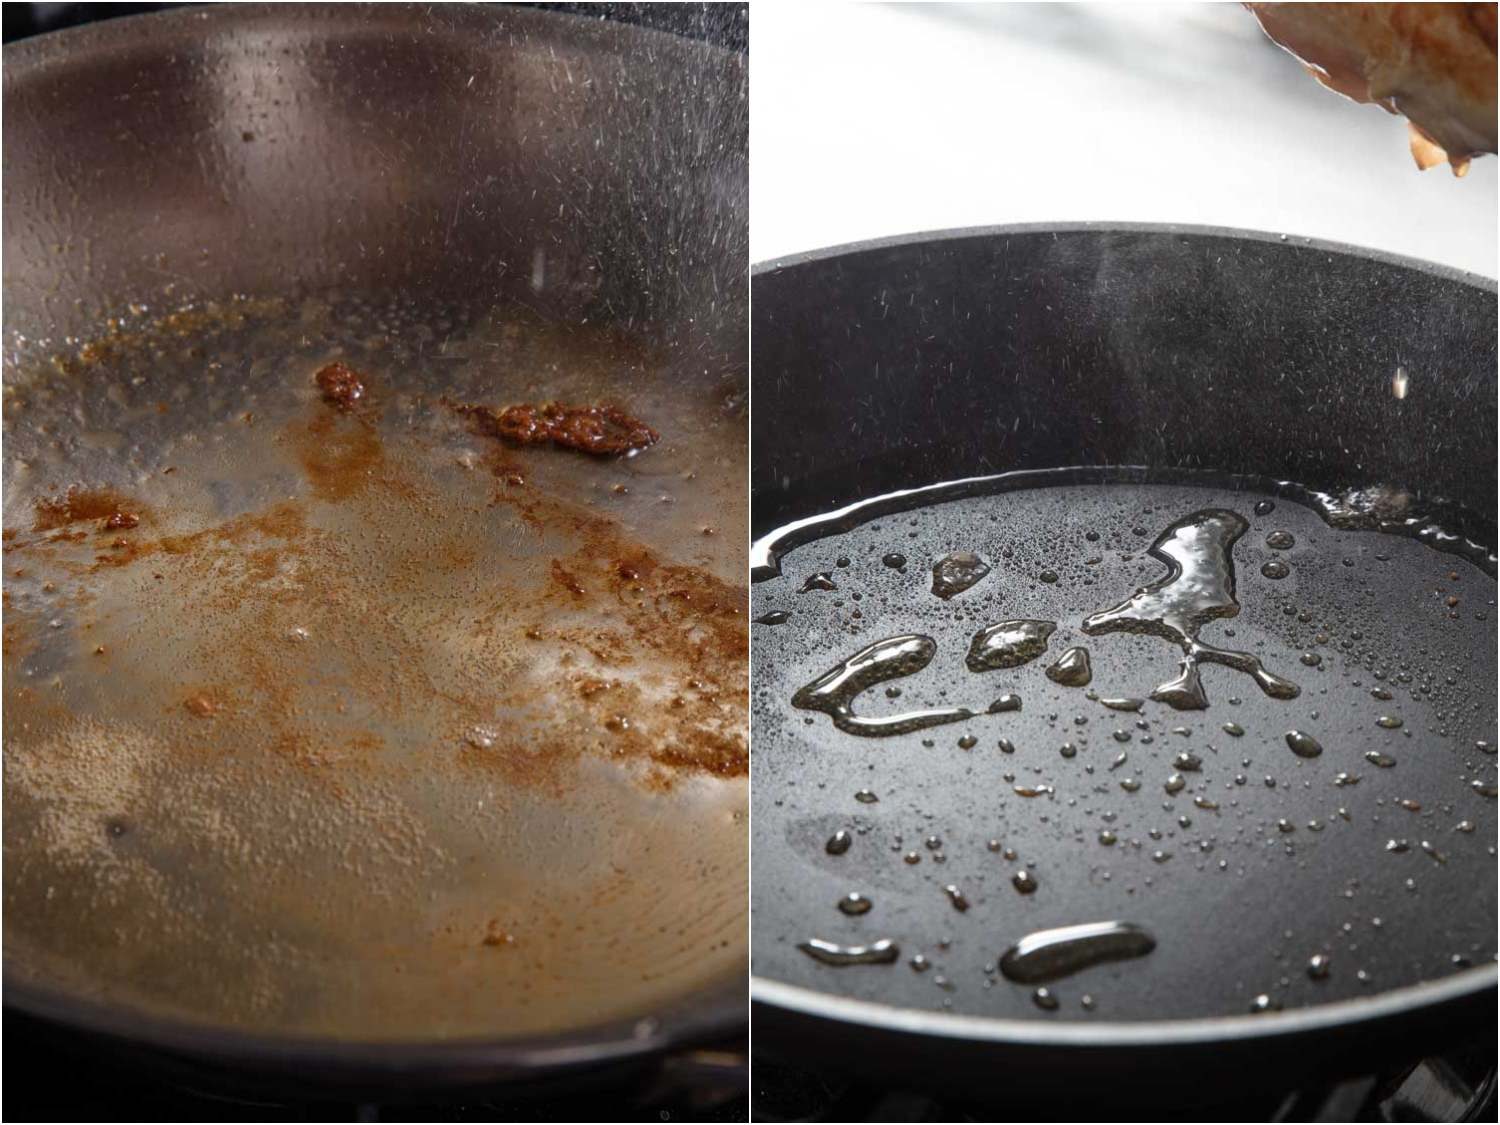 A side-by-side image showing the fond (browning) that develops on the bottom of a stainless steel skillet compared to the lack of it in a nonstick one.